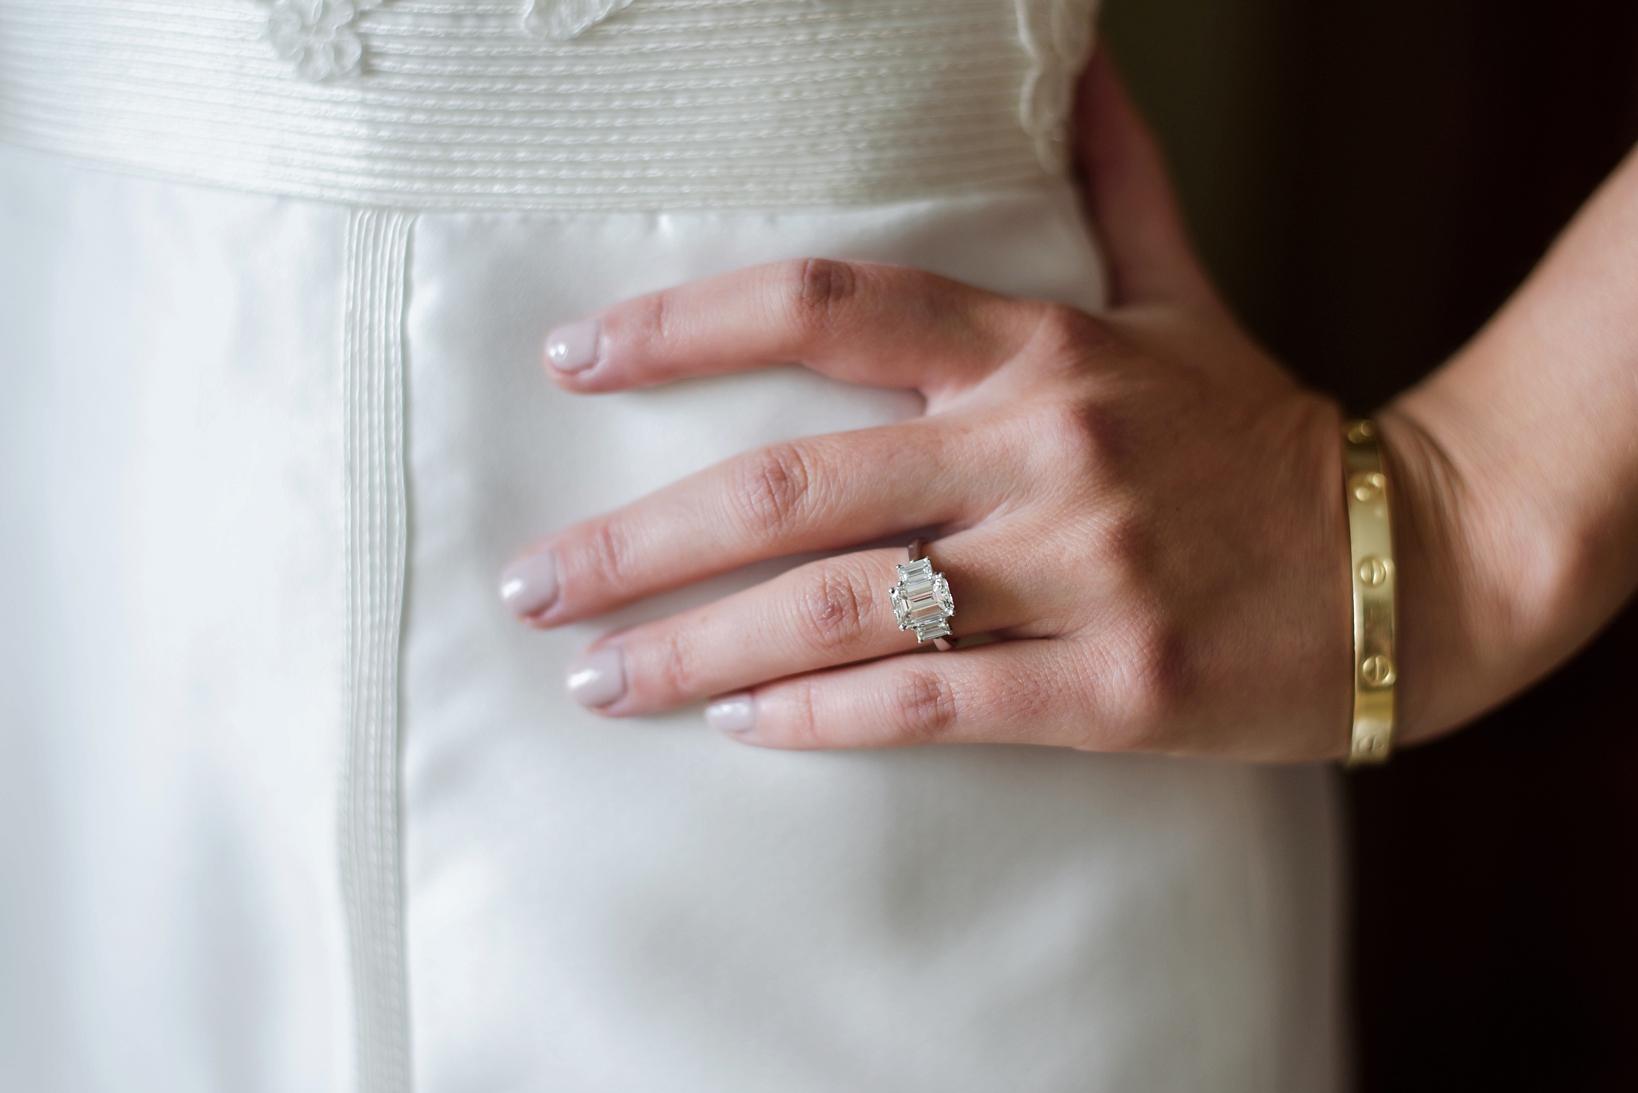 The bride's hand with engagement ring against her silk wedding dress